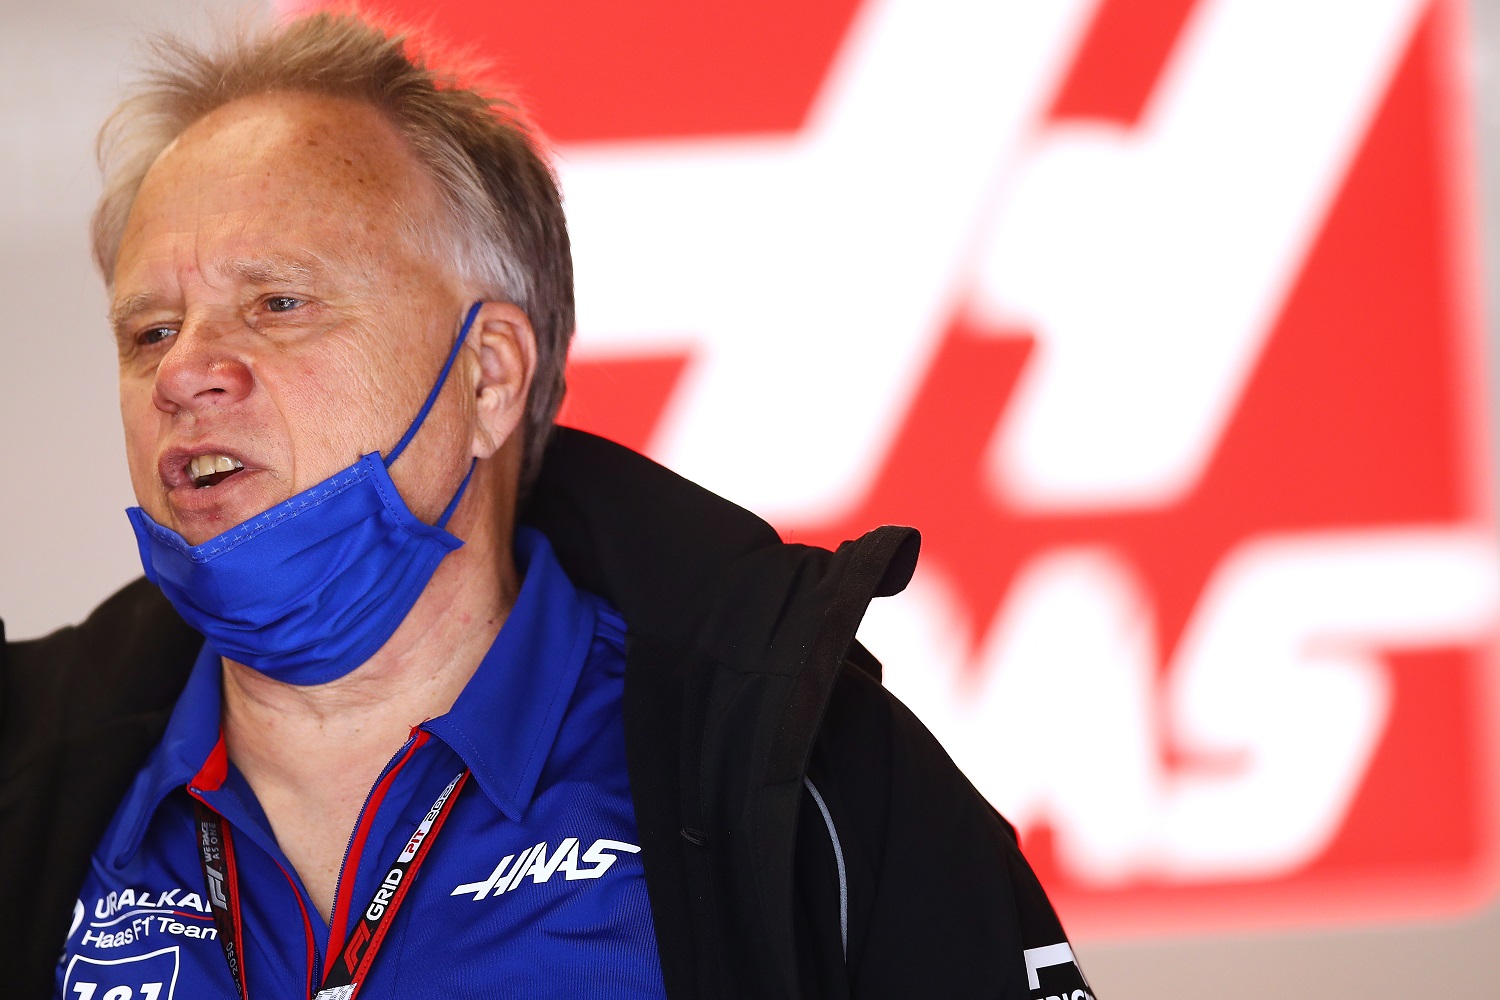 Gene Haas Team gestures in the garage during Formula 1 testing on Feb 24, 2022, in Barcelona, Spain. | Eric Alonso/Getty Images